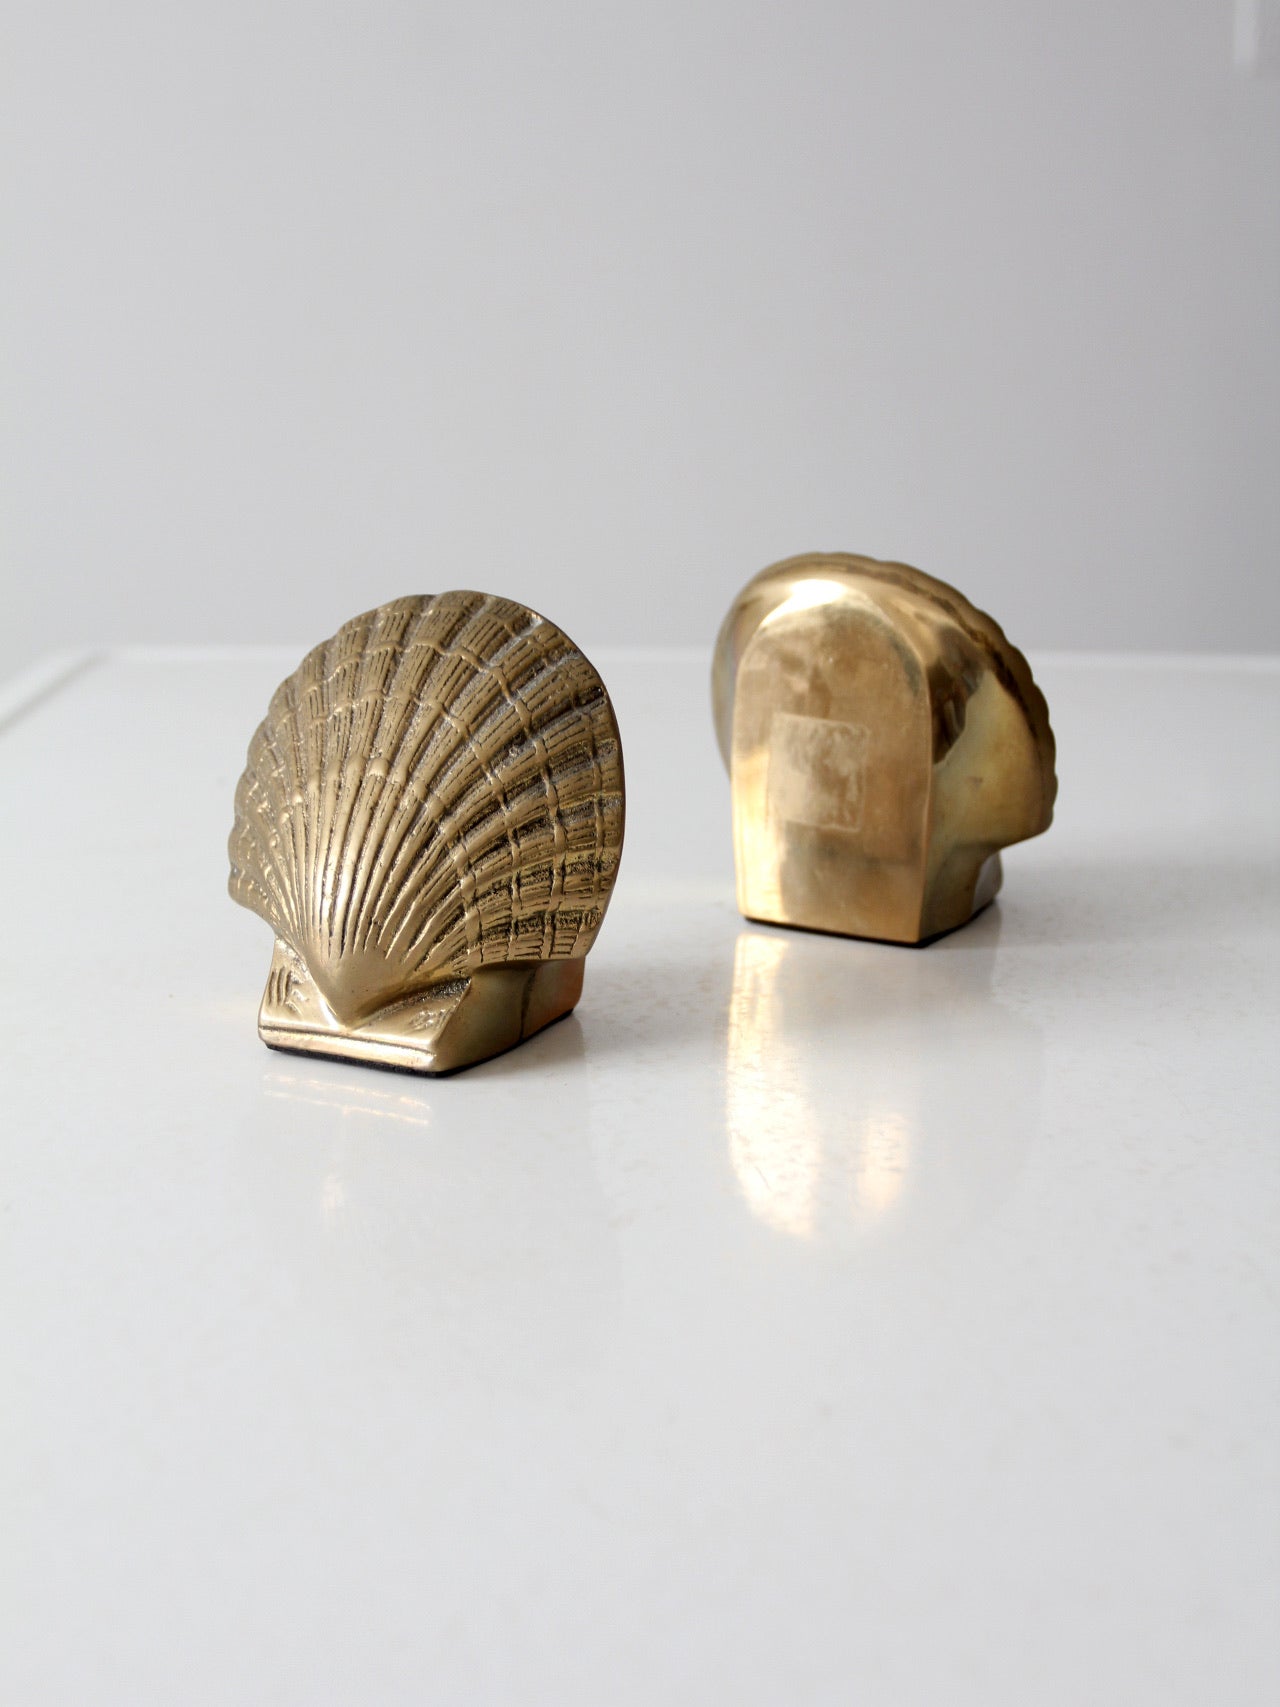 Vintage Genuine Solid Brass Clam Shell Bookends -  Australia